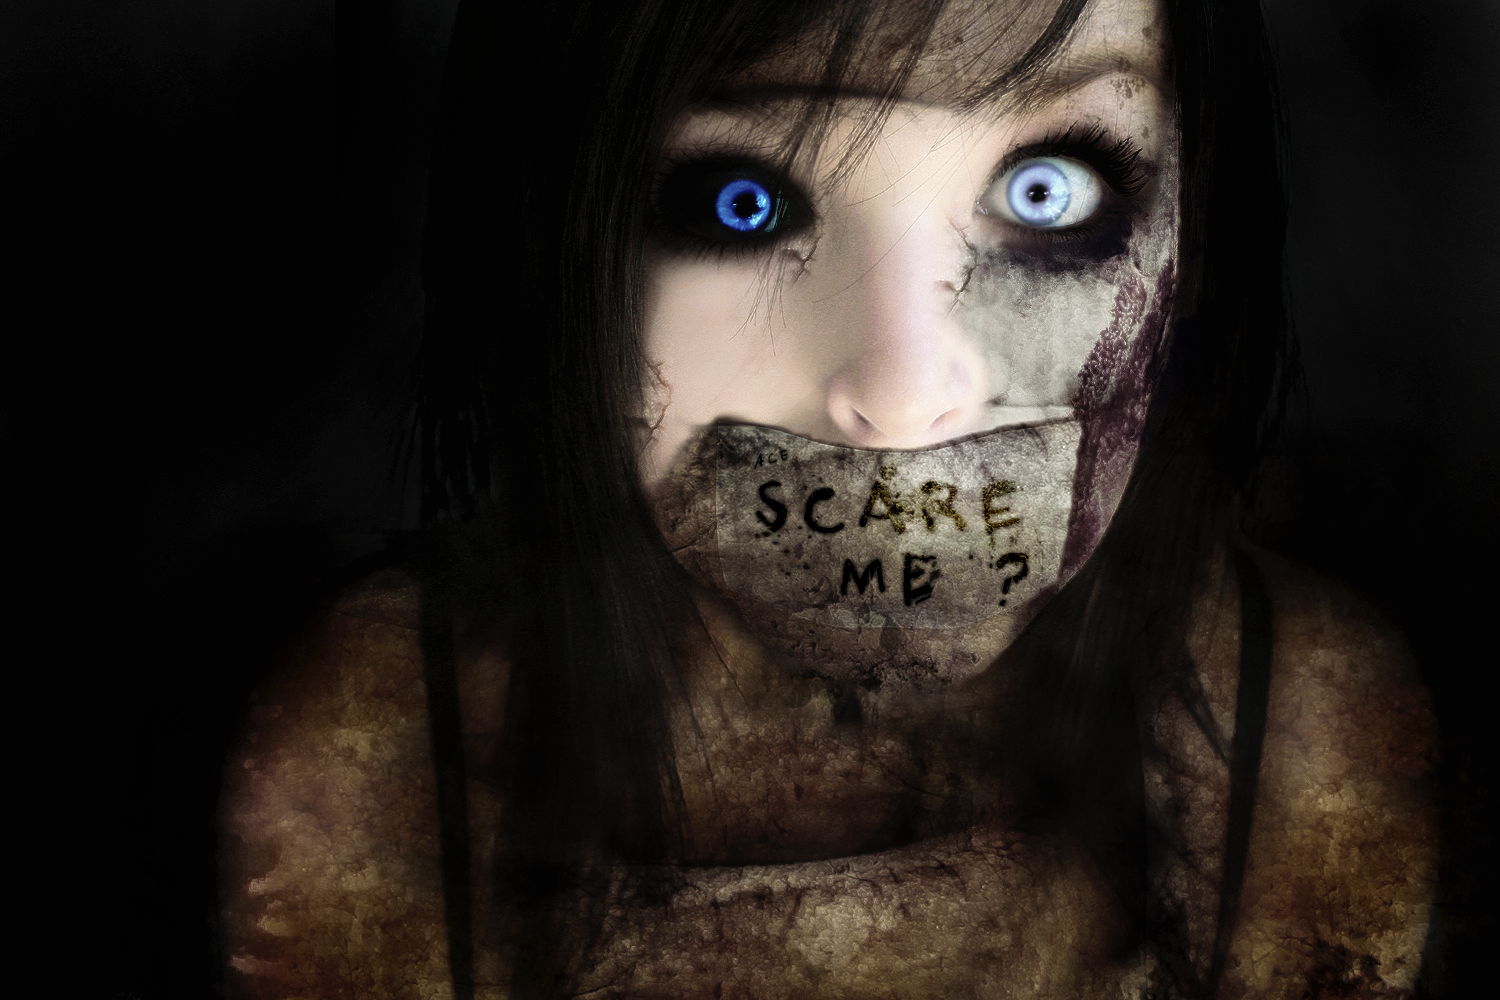 Wallpaper_Fear_Girl_by_AceGraph.png